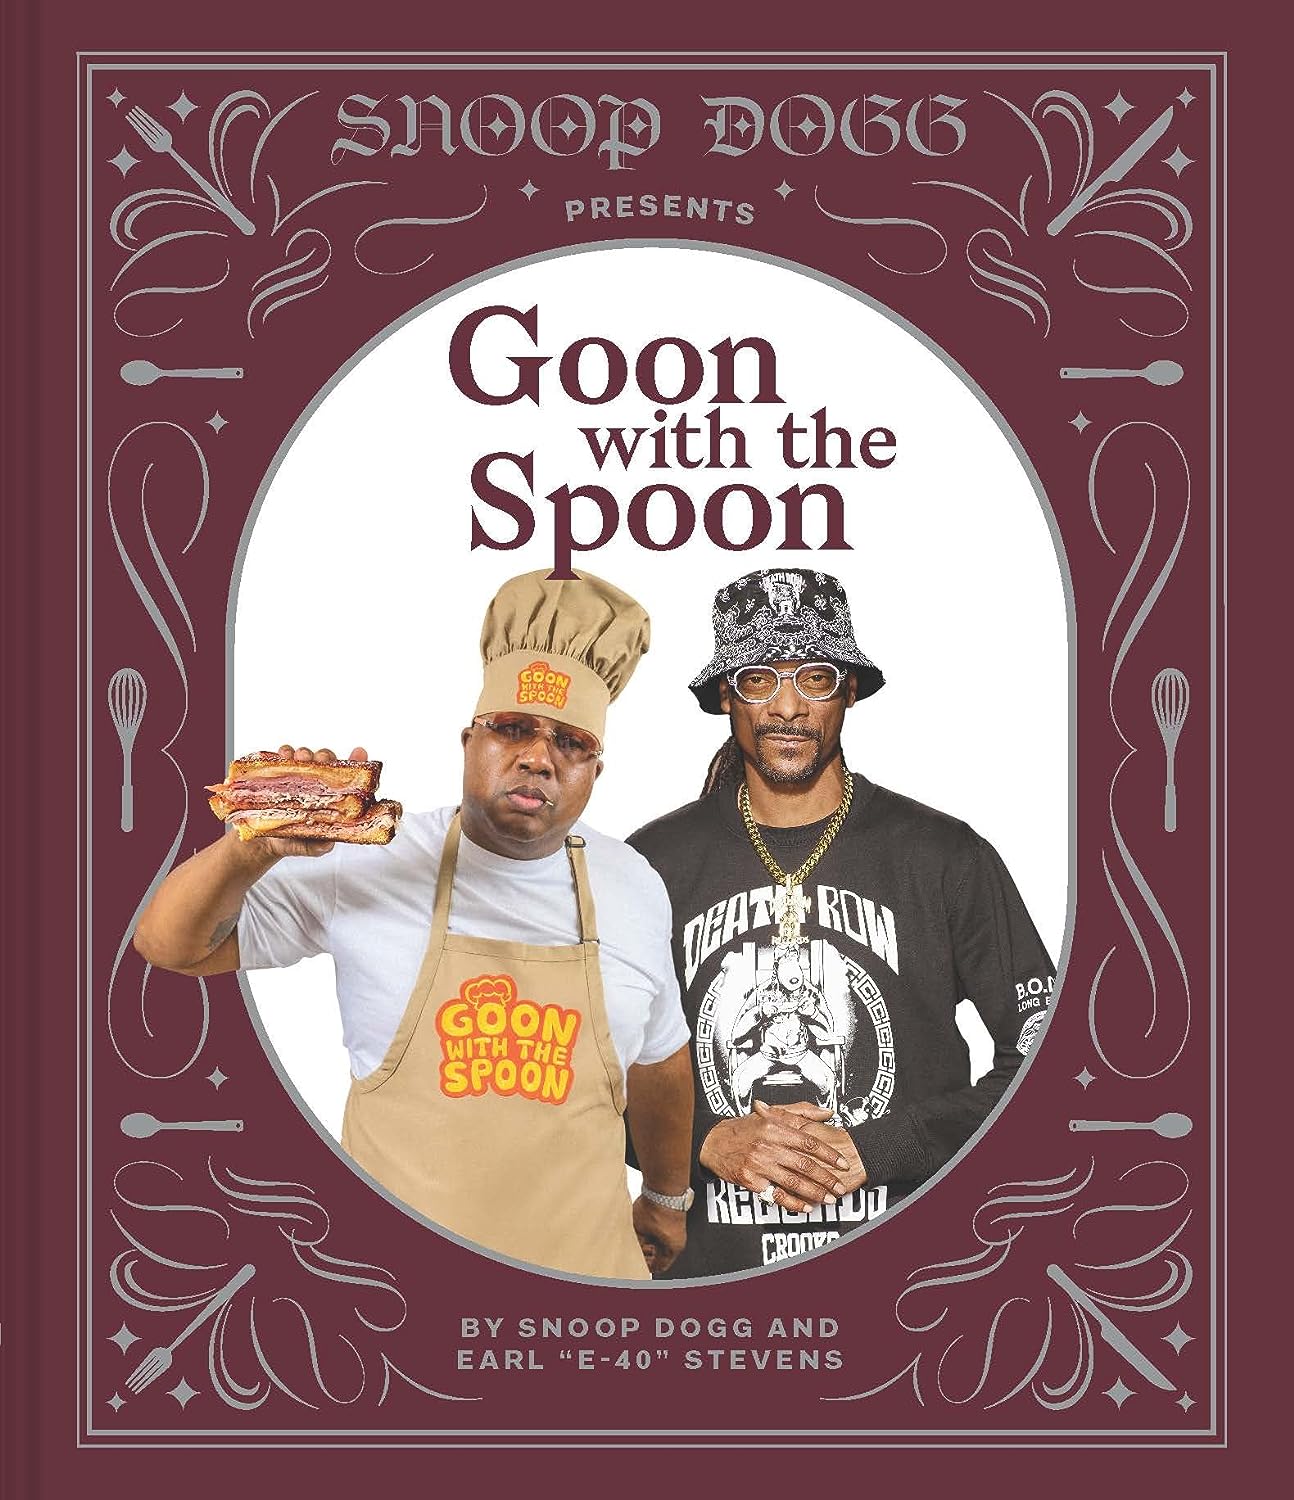 A book cover featuring two Black men. One is wearing an apron and chef's hat and holding up a large meat sandwich. The other is wearing a bucket hat, Death Row Records shirt and white spectacles.